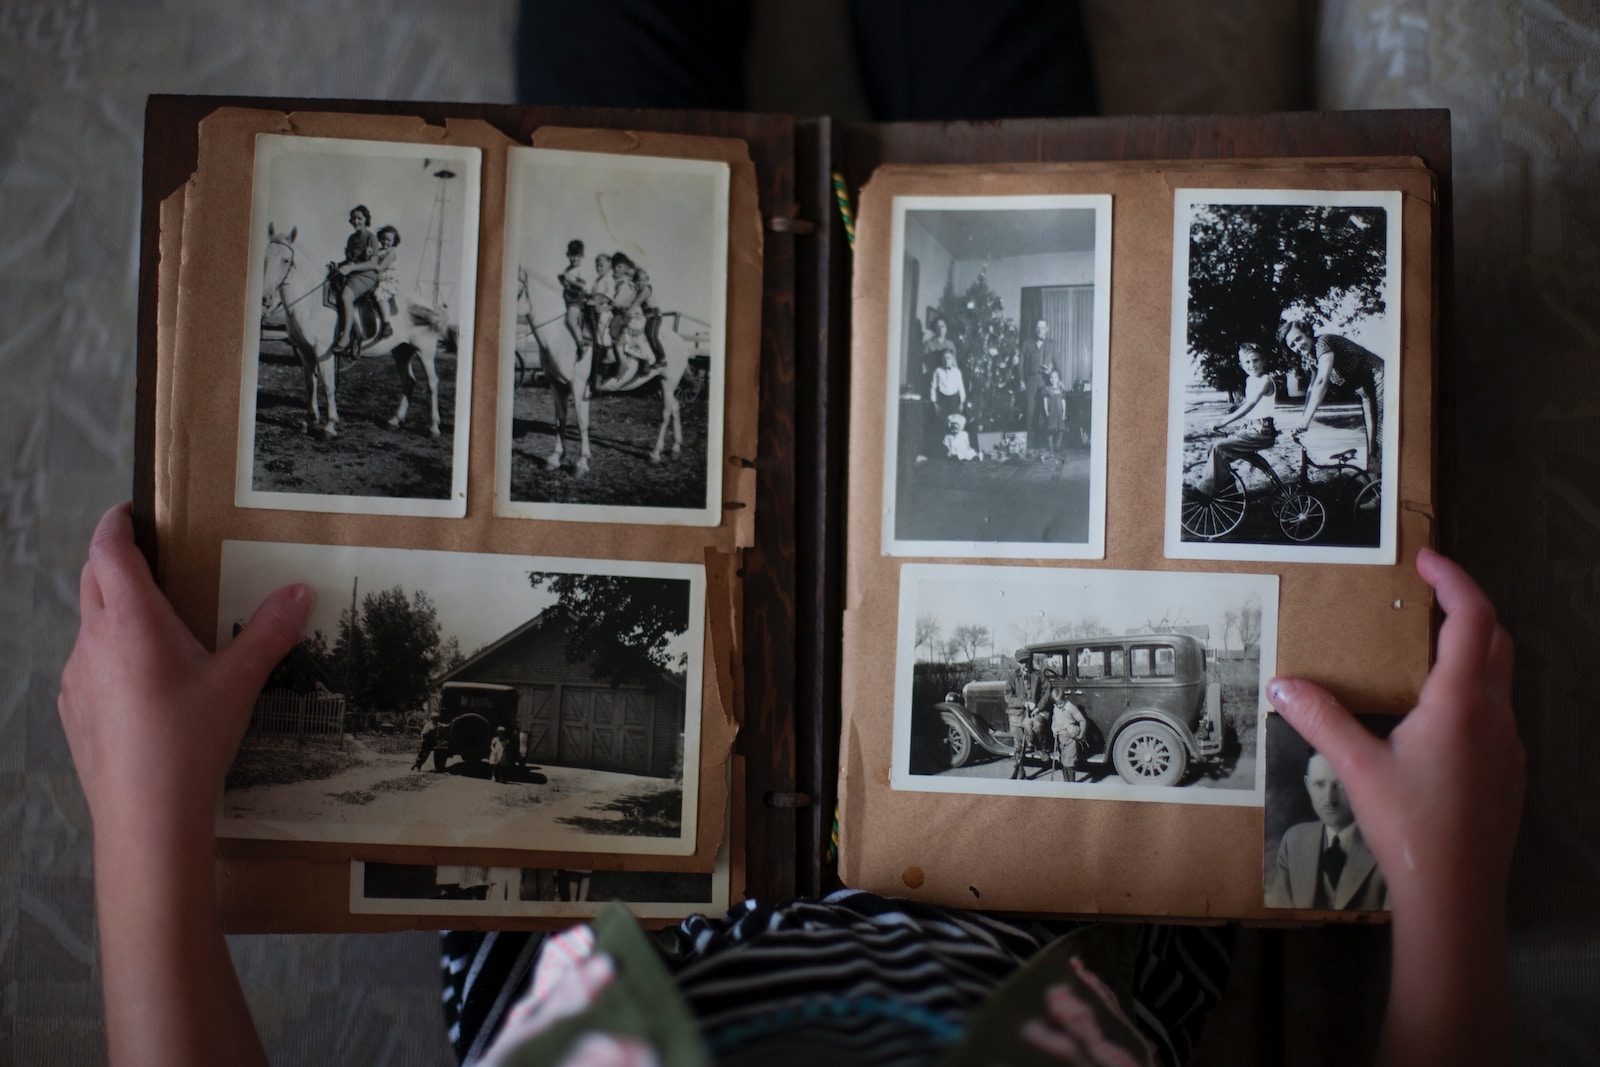 24 class - person opening photo album displaying grayscale photos